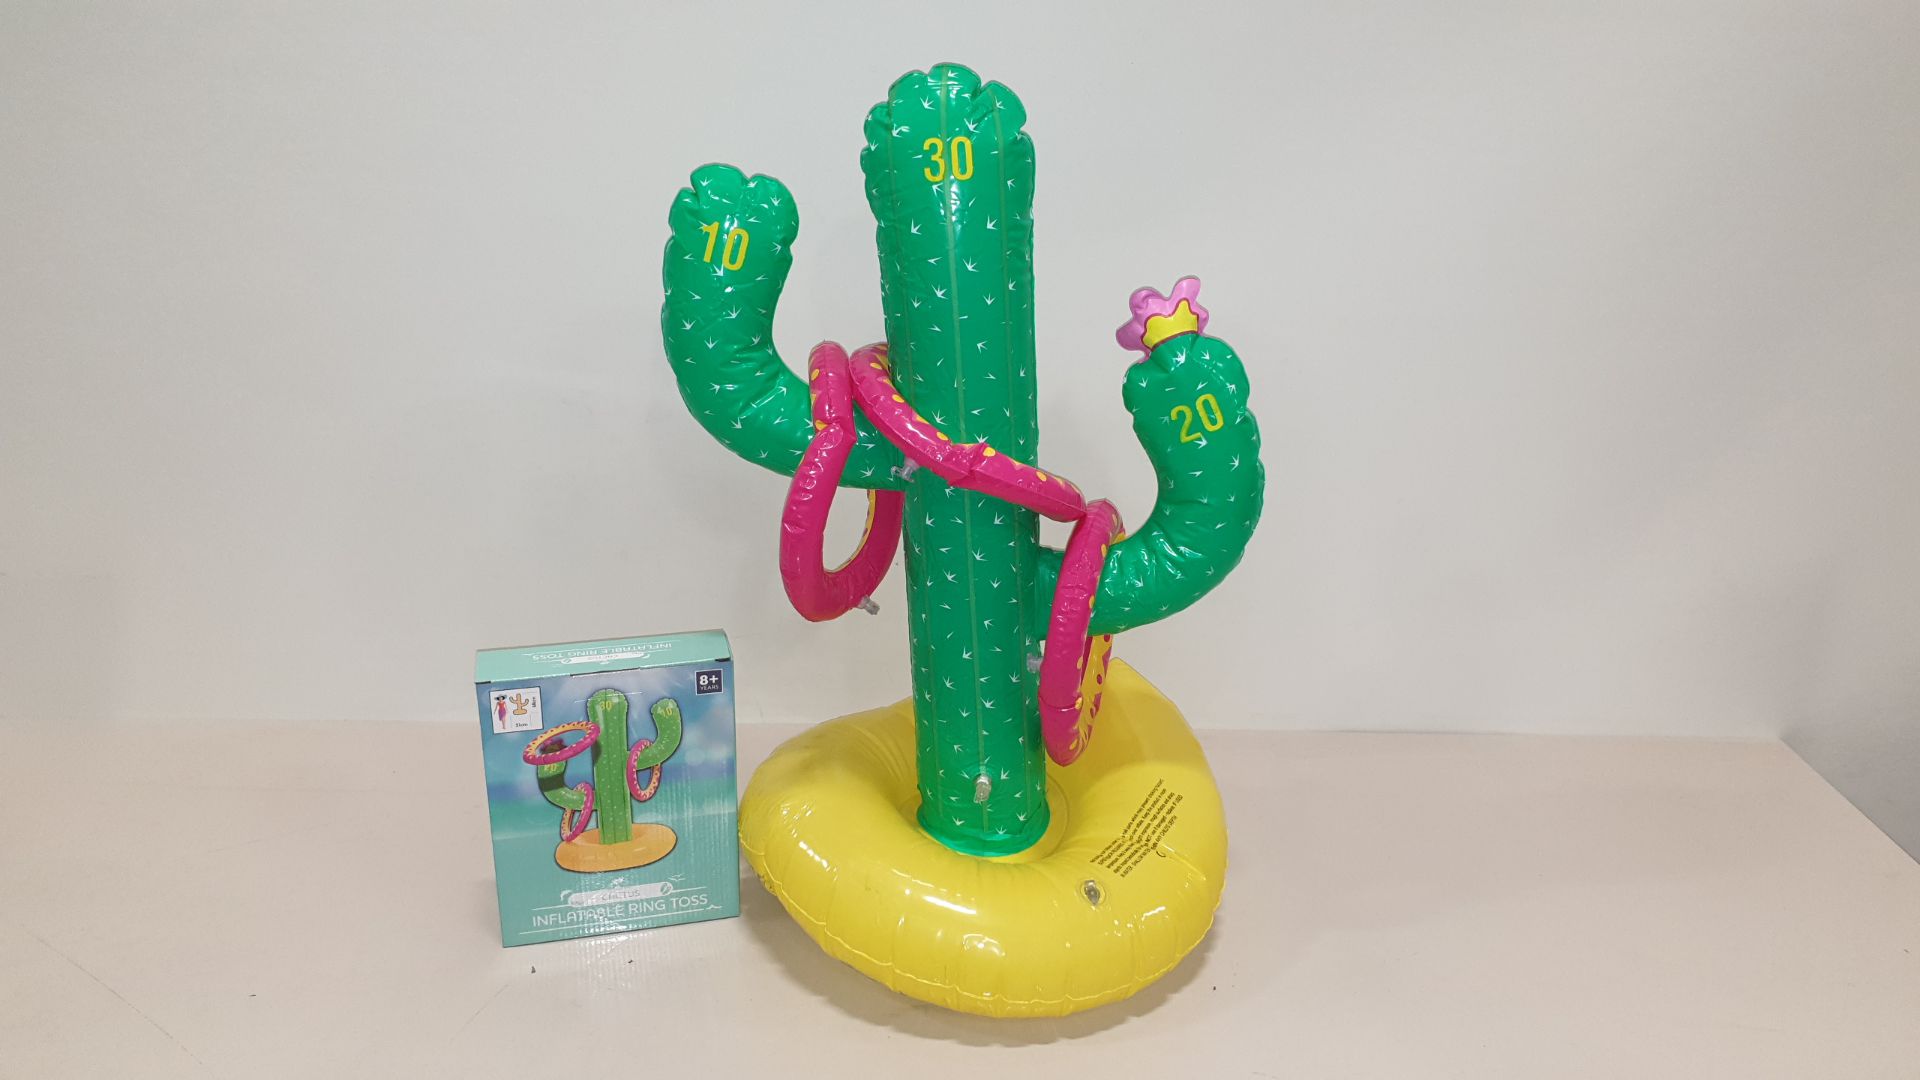 60 X CACTUS INFLATABLE RING TOSS GAME'S - CONTAINED IN 10 BOXES